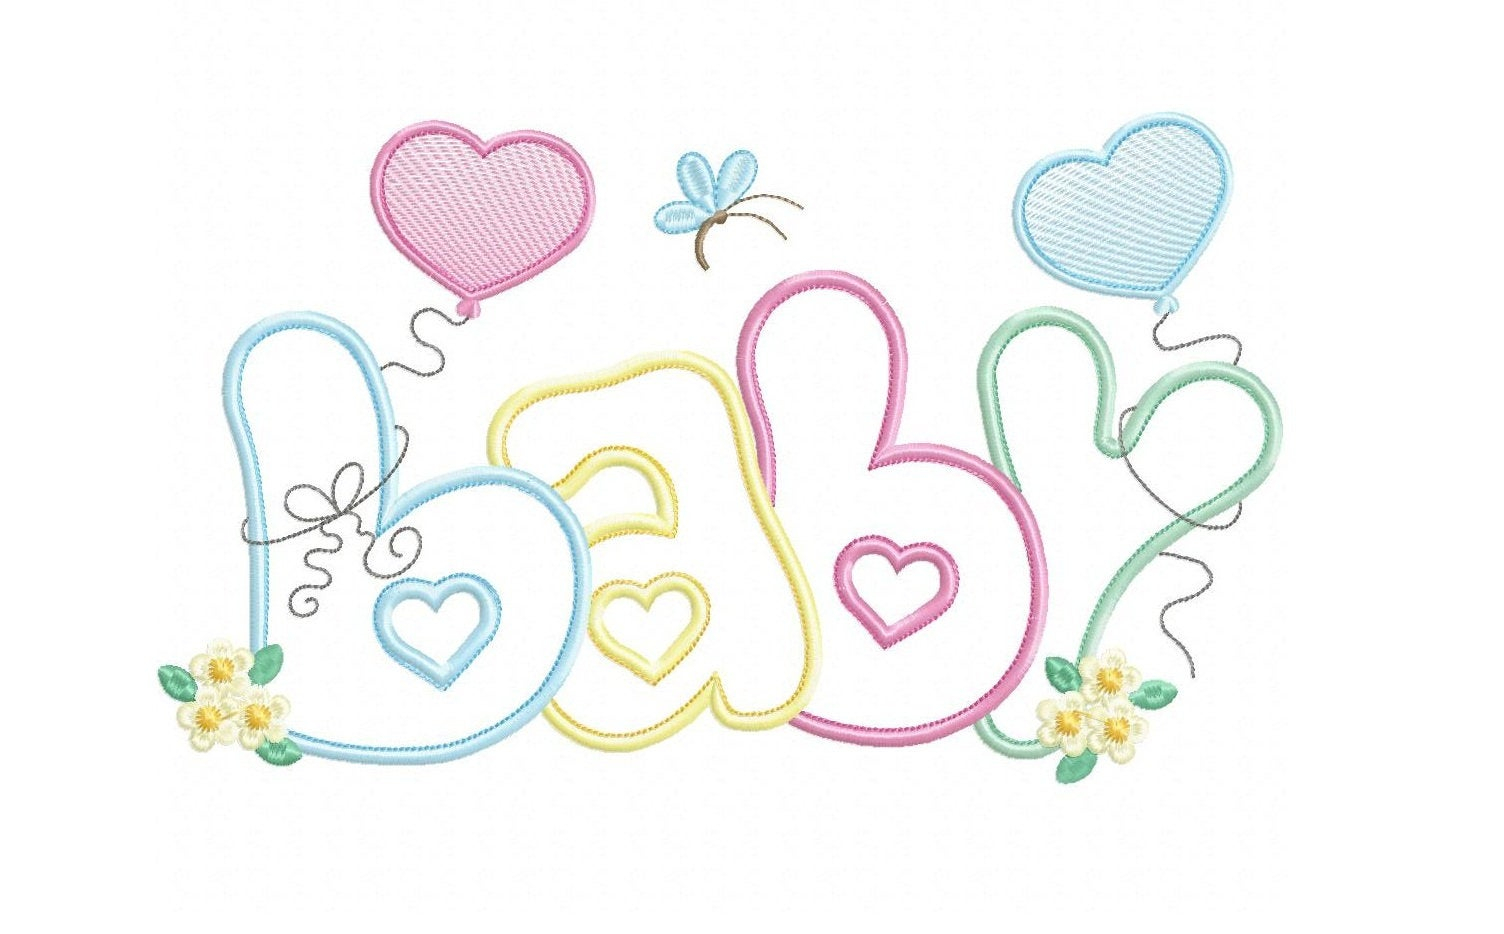 Baby Embroidery Patterns Ba Embroidery Designs Newborn Embroidery Design Machine Embroidery Pattern File Girl Embroidery Boy Embroidery Balloon 6 Sizes